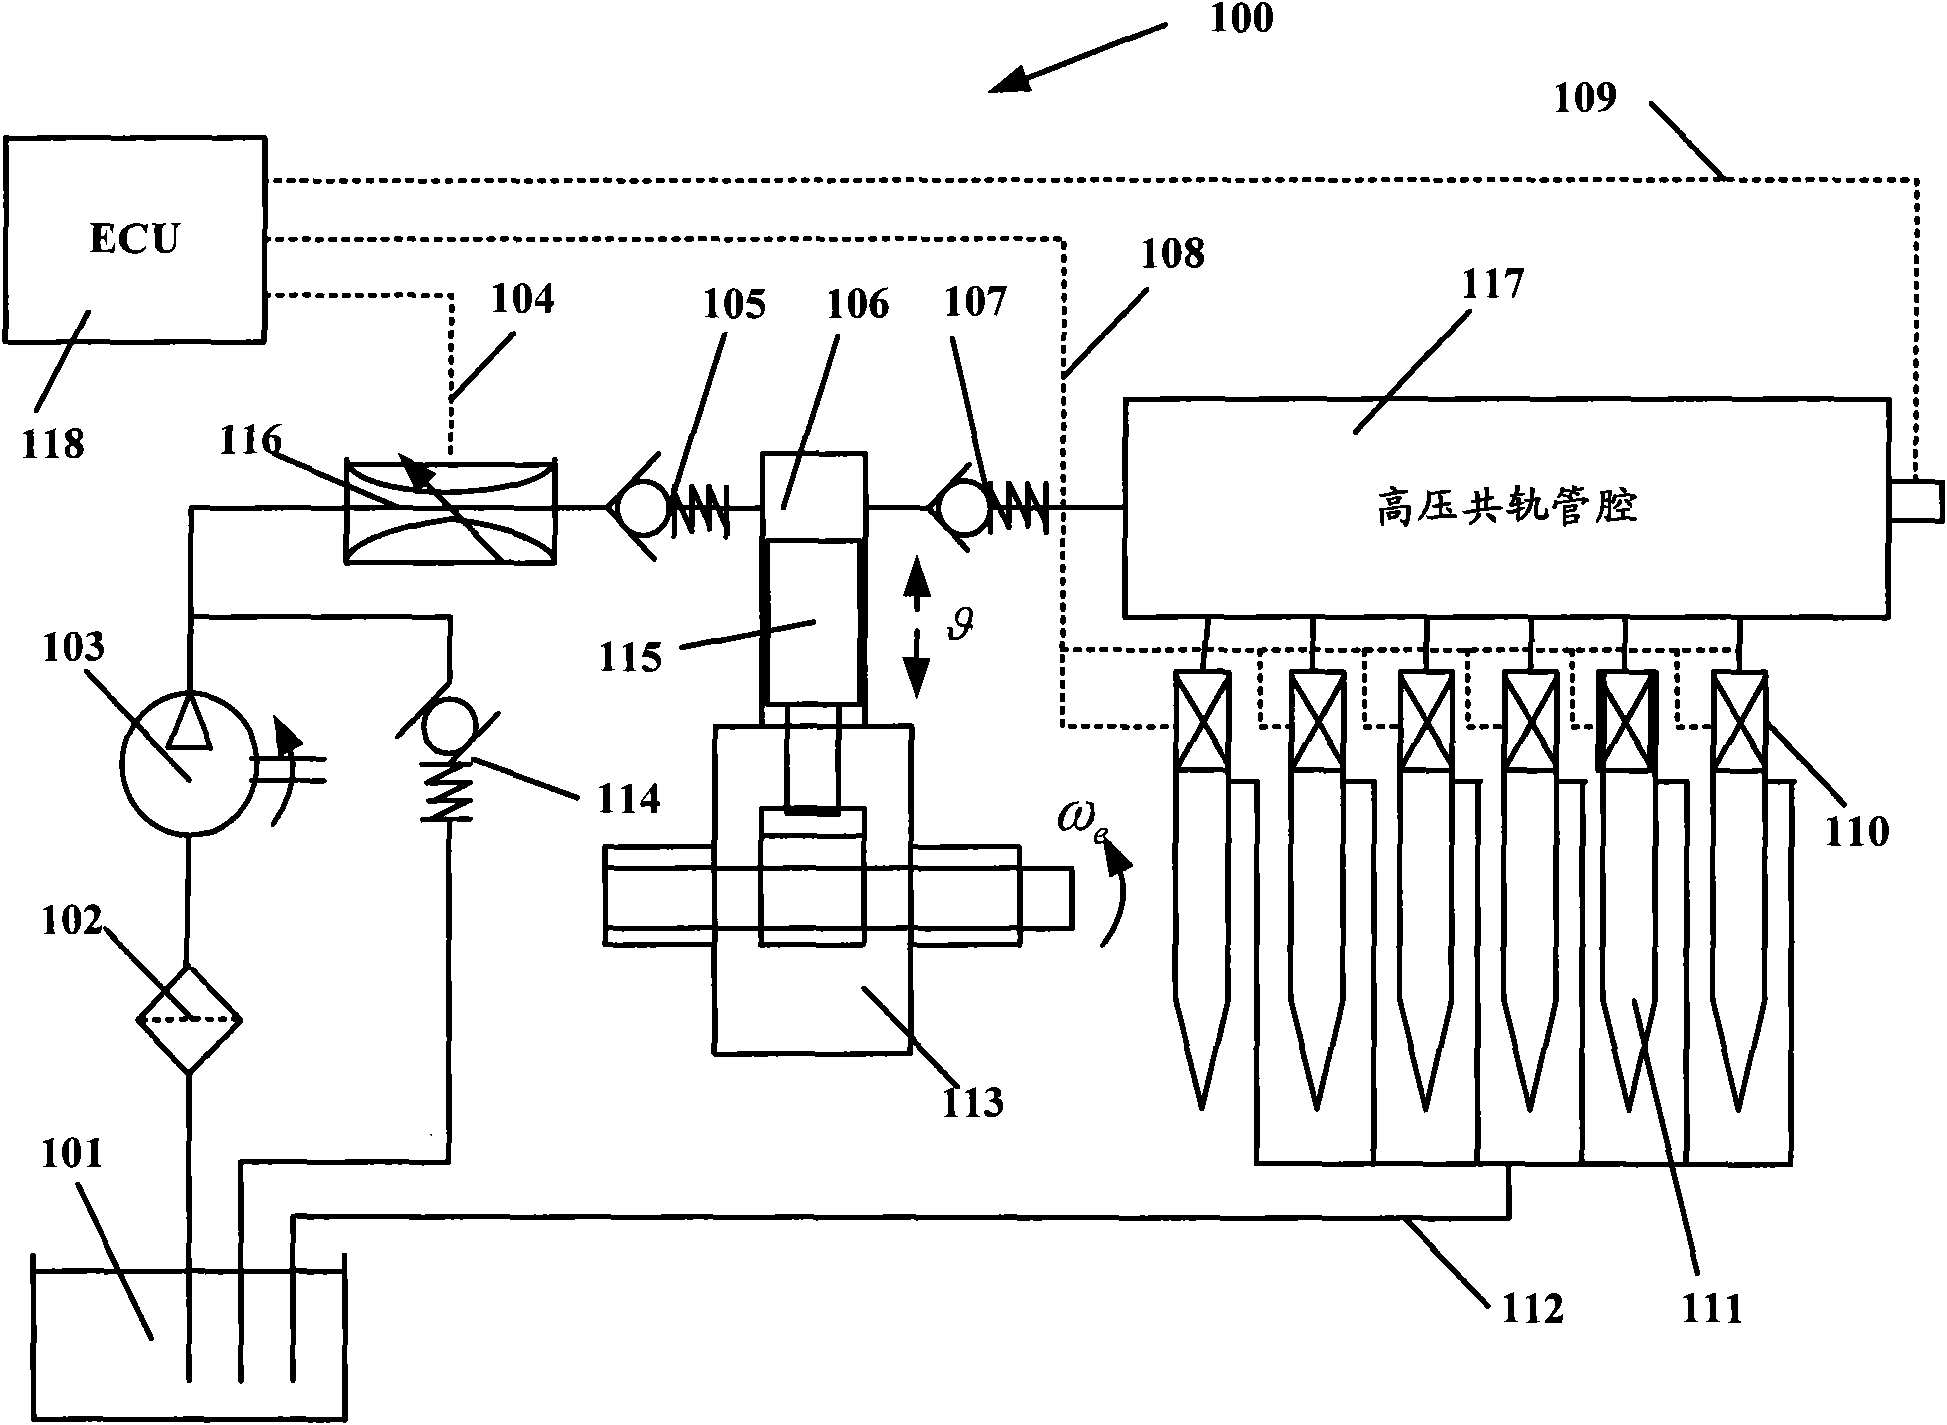 Equipment and method for controlling high-pressure common rail system of diesel engine